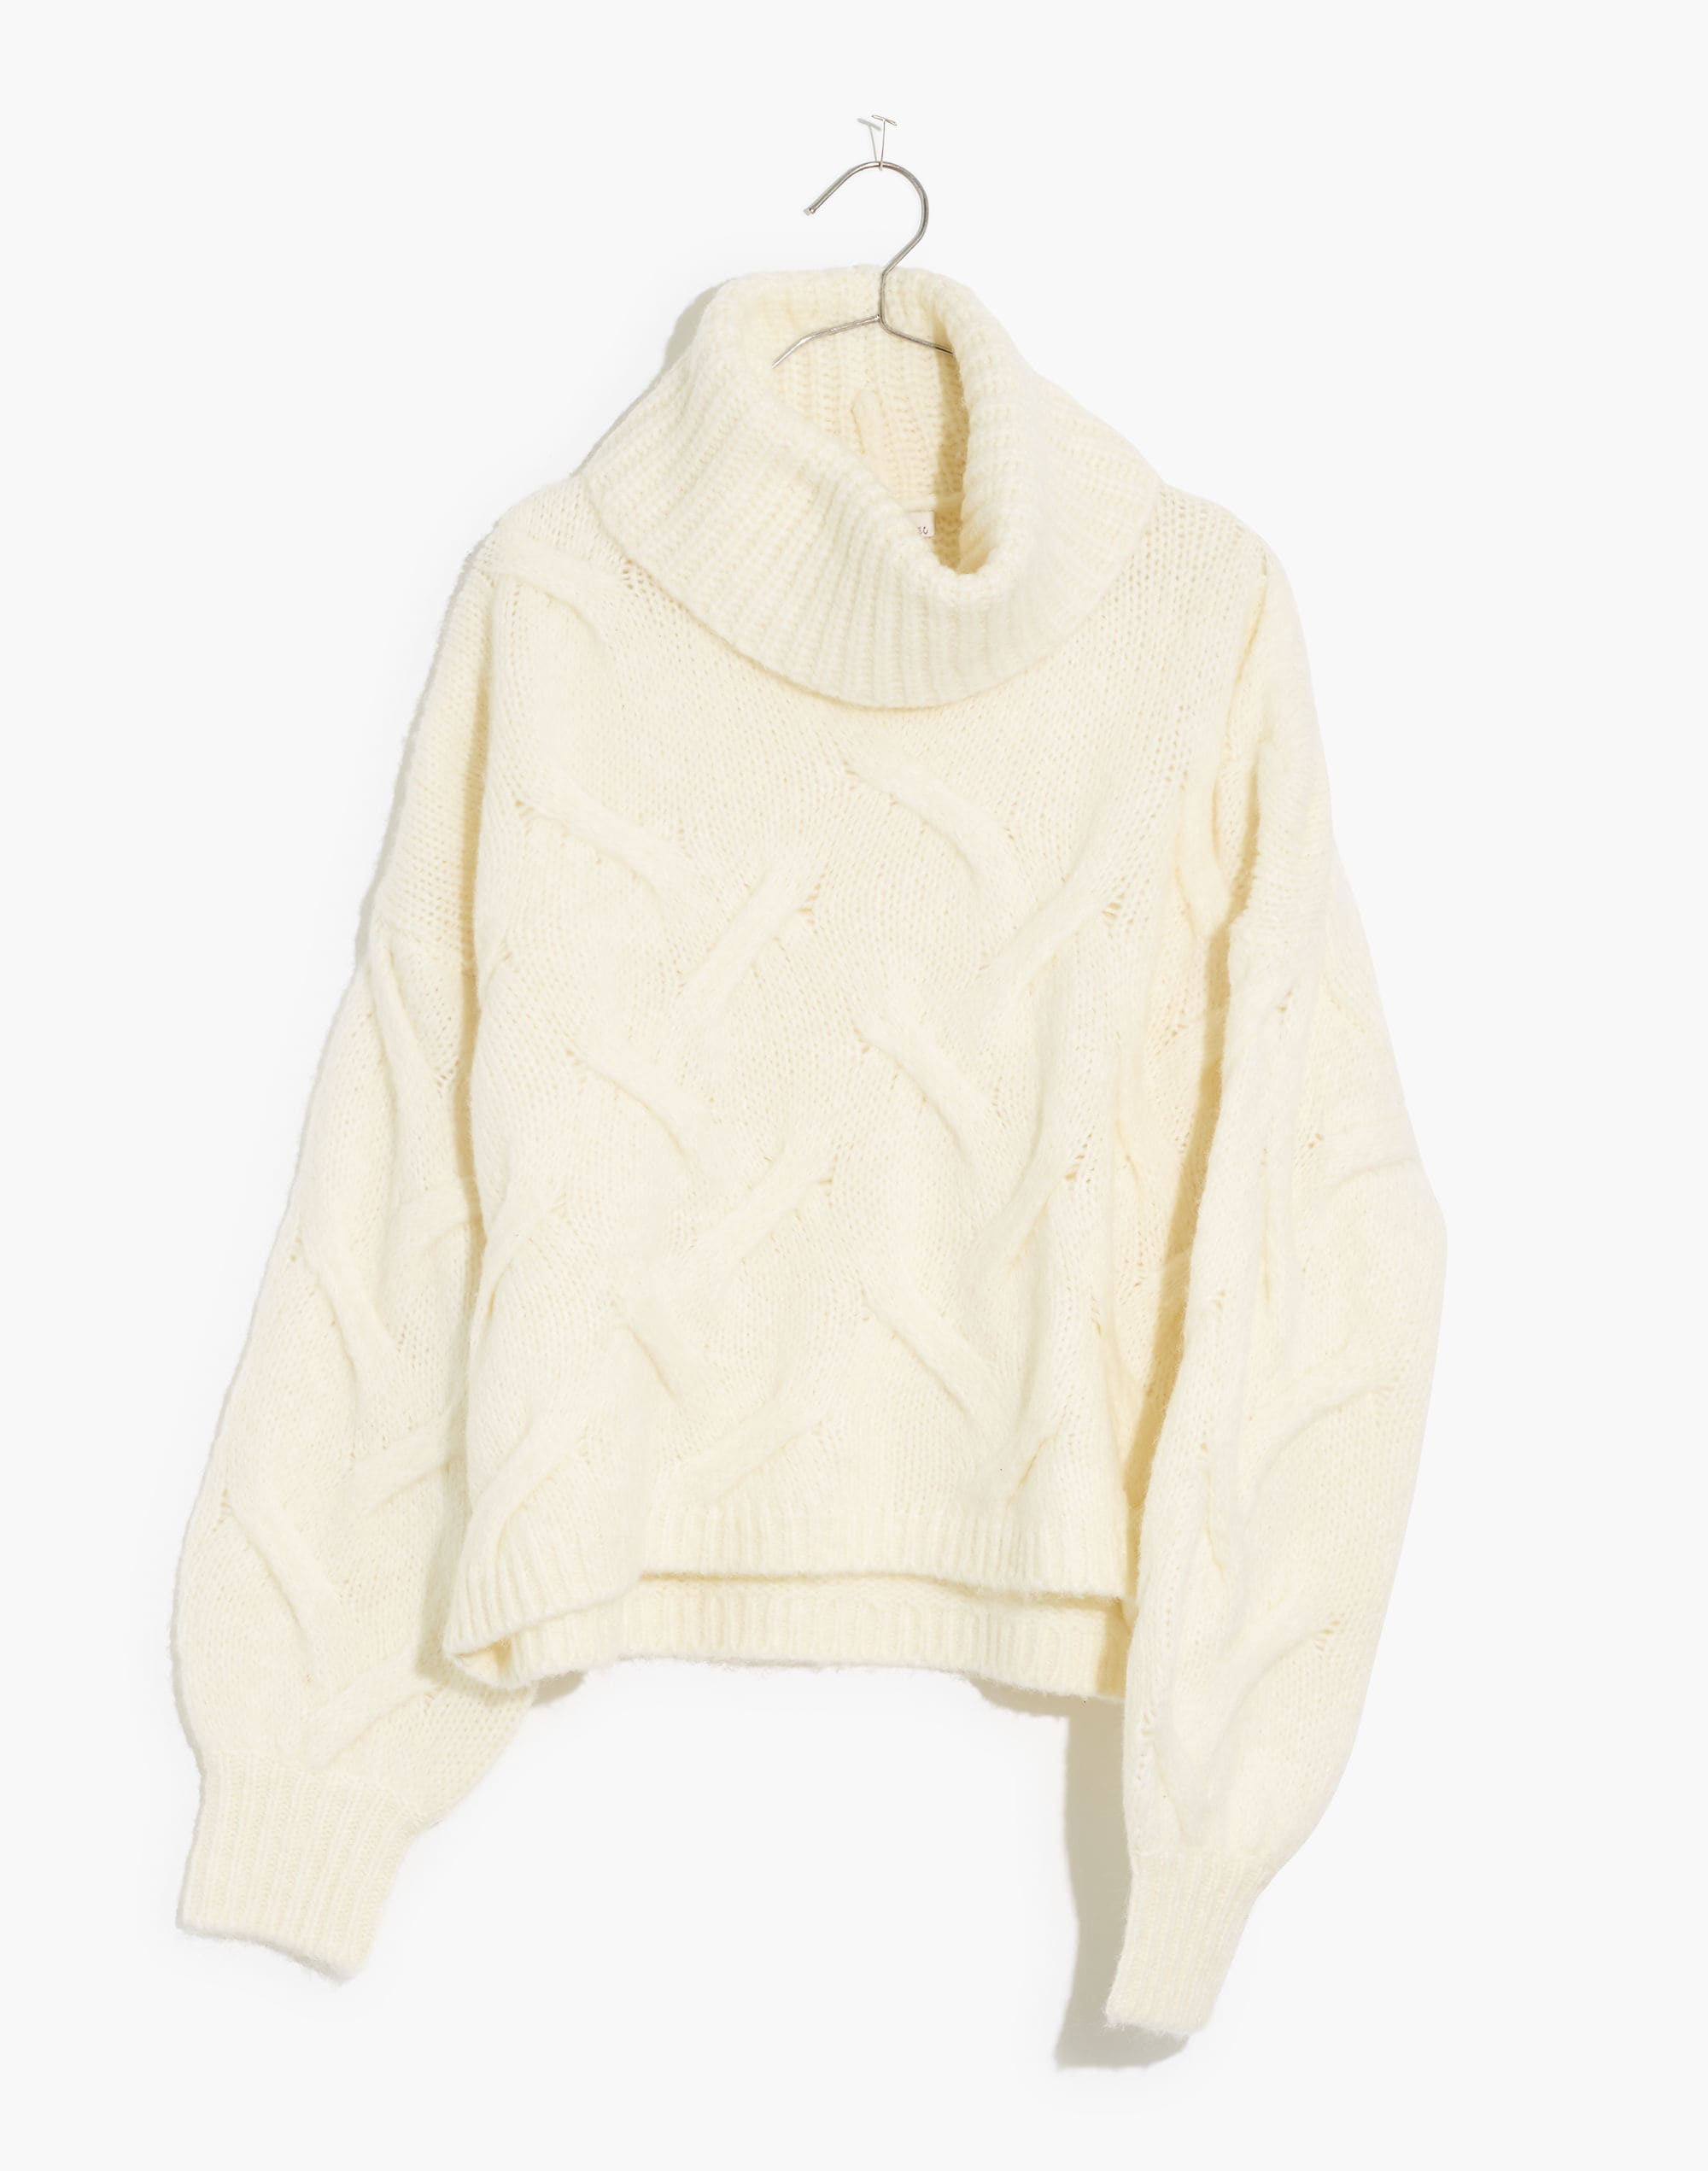 Recreational Habits Dallas Cable Knit Turtleneck Sweater